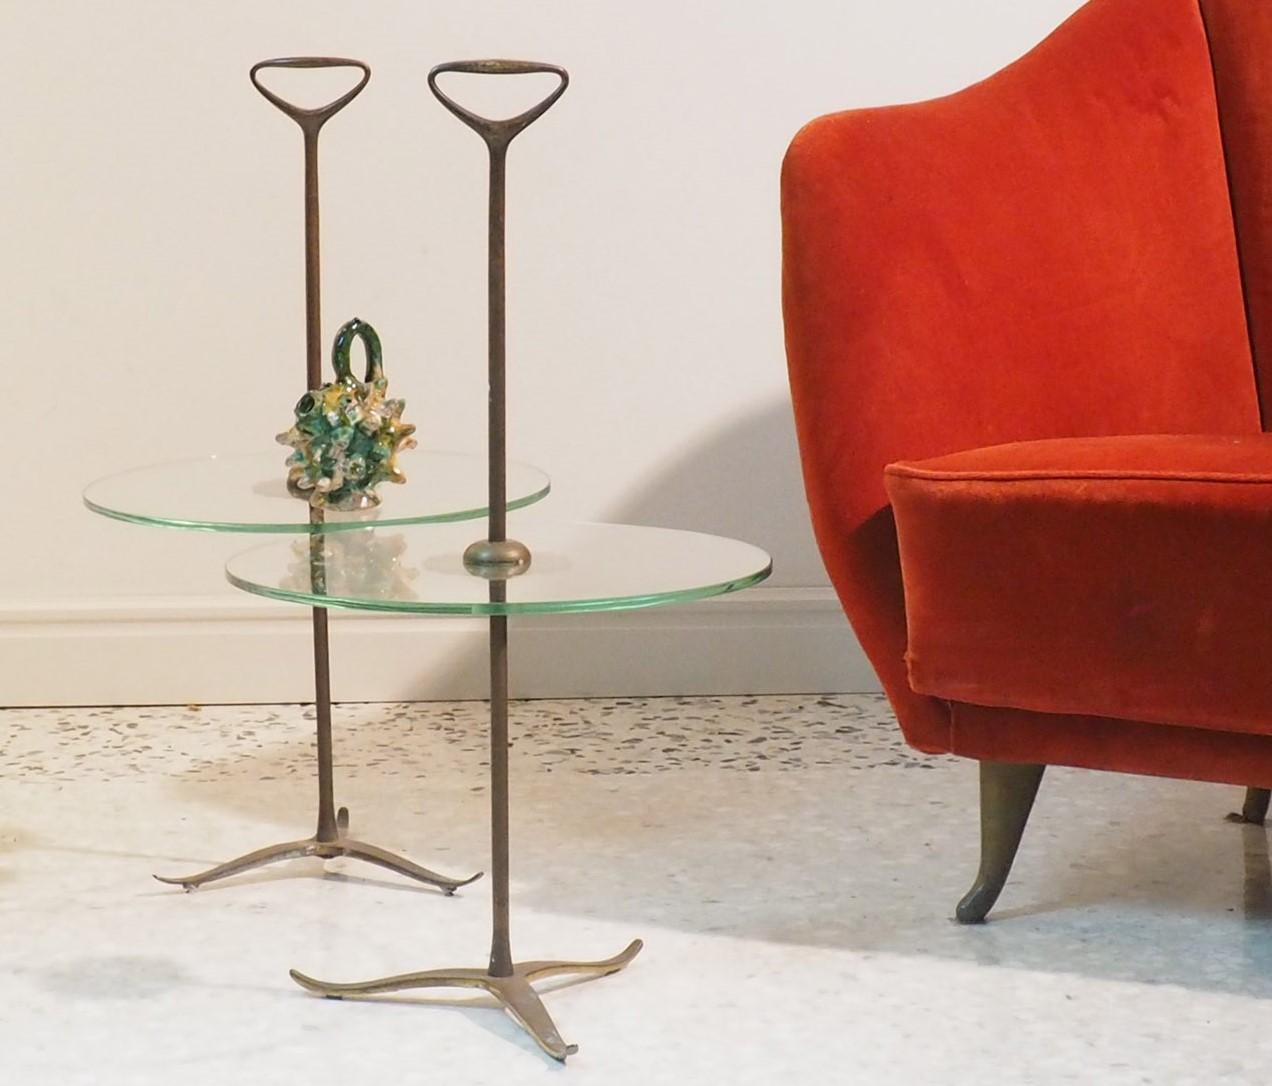 Pair of rare side table designed by architect Cesare Lacca, with brass handle and original Verde Nilo glass top. Original Patina that can be polished.
An elegant item perfect as side tables as nightstands.
Born in Naples in 1929, the Italian